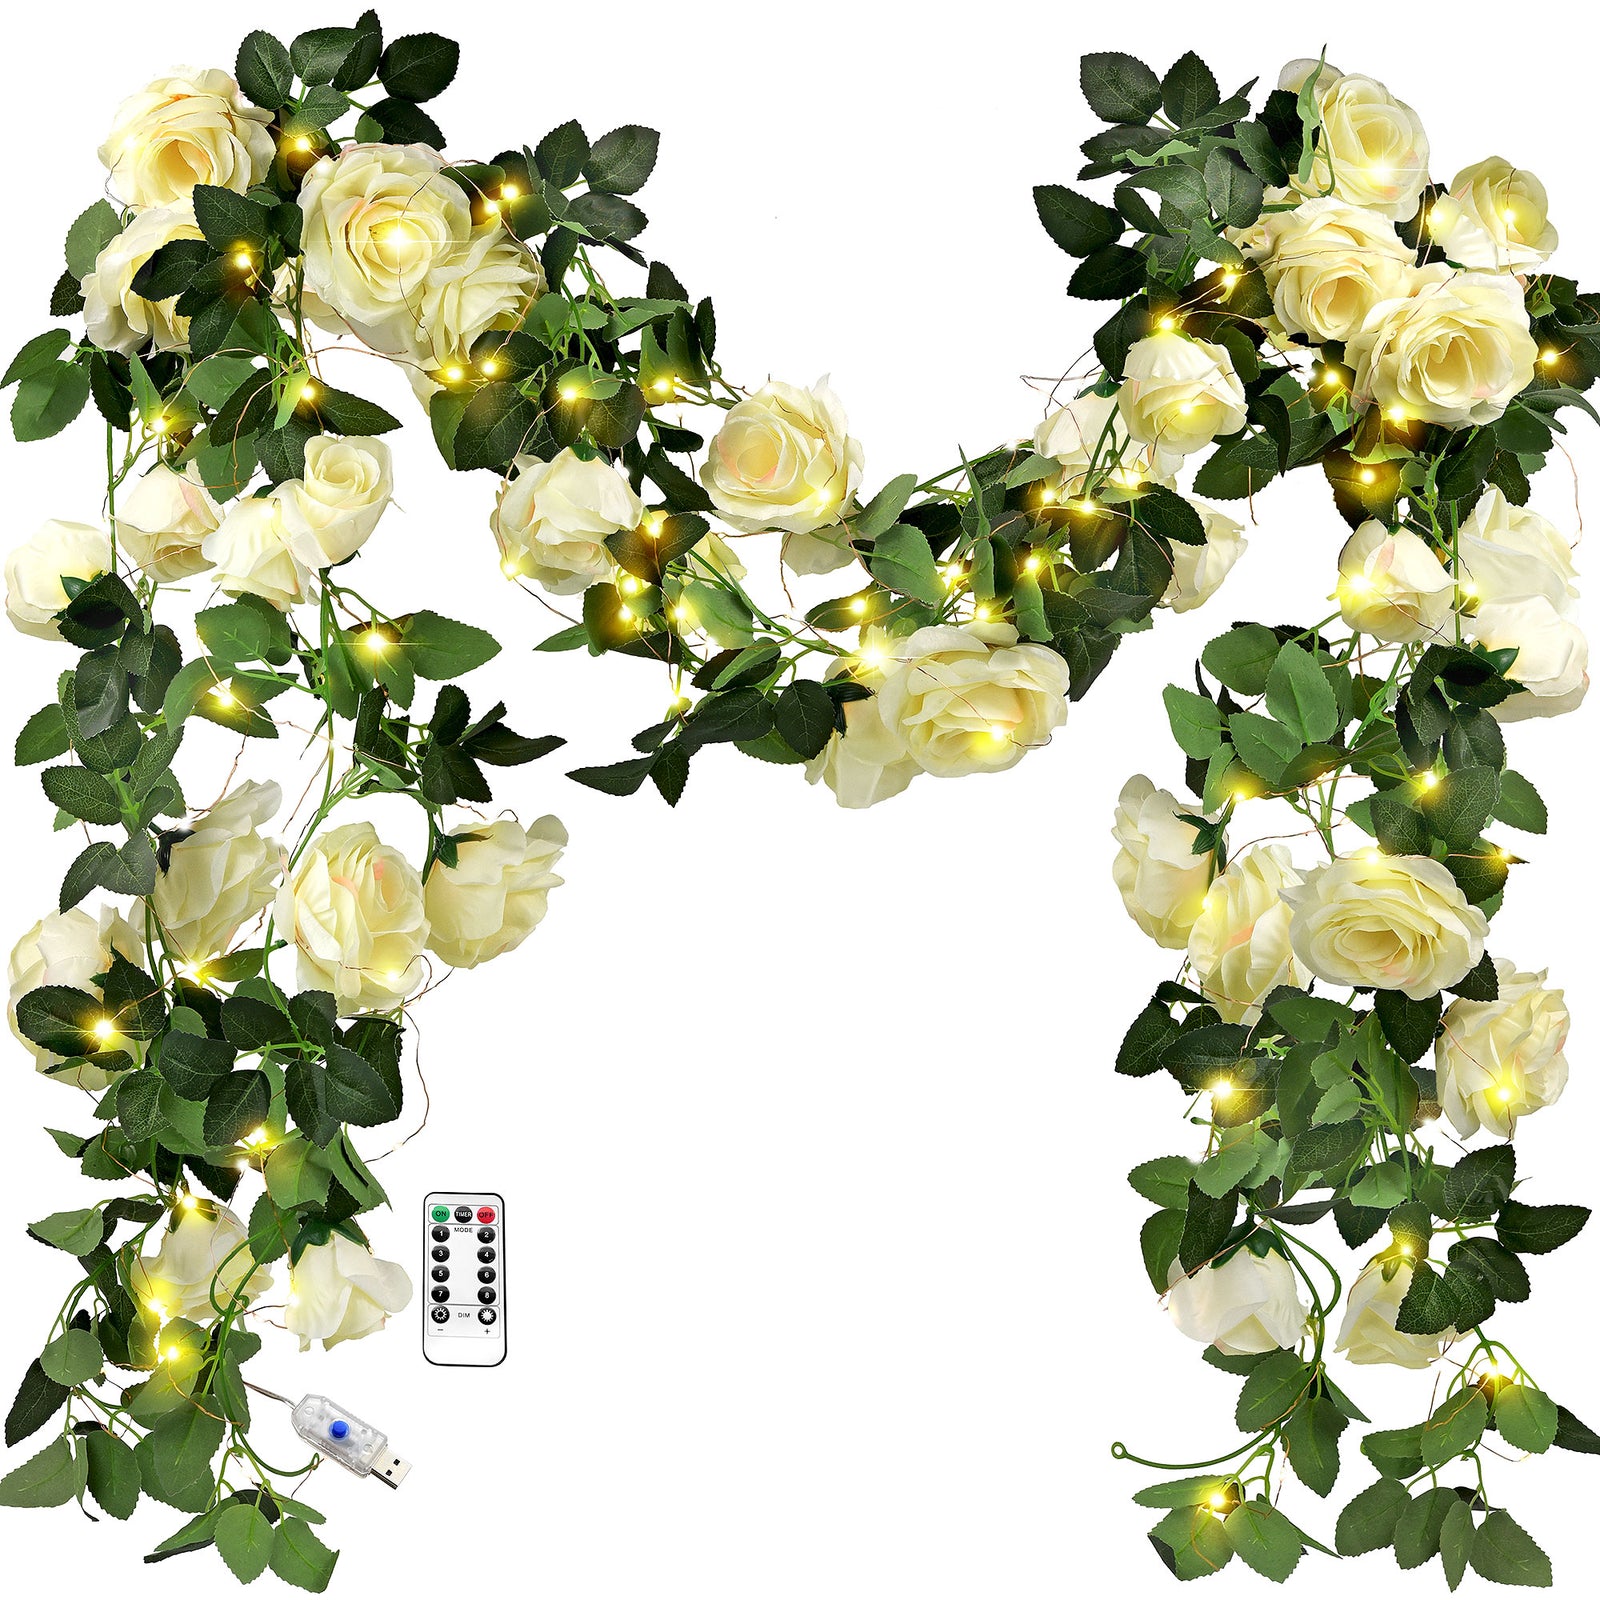 29 Ft 4 Pack Cream White Rose Silk Flower Garland Artificial Flowers Decoration Hanging Floral with 66 feet String Lights